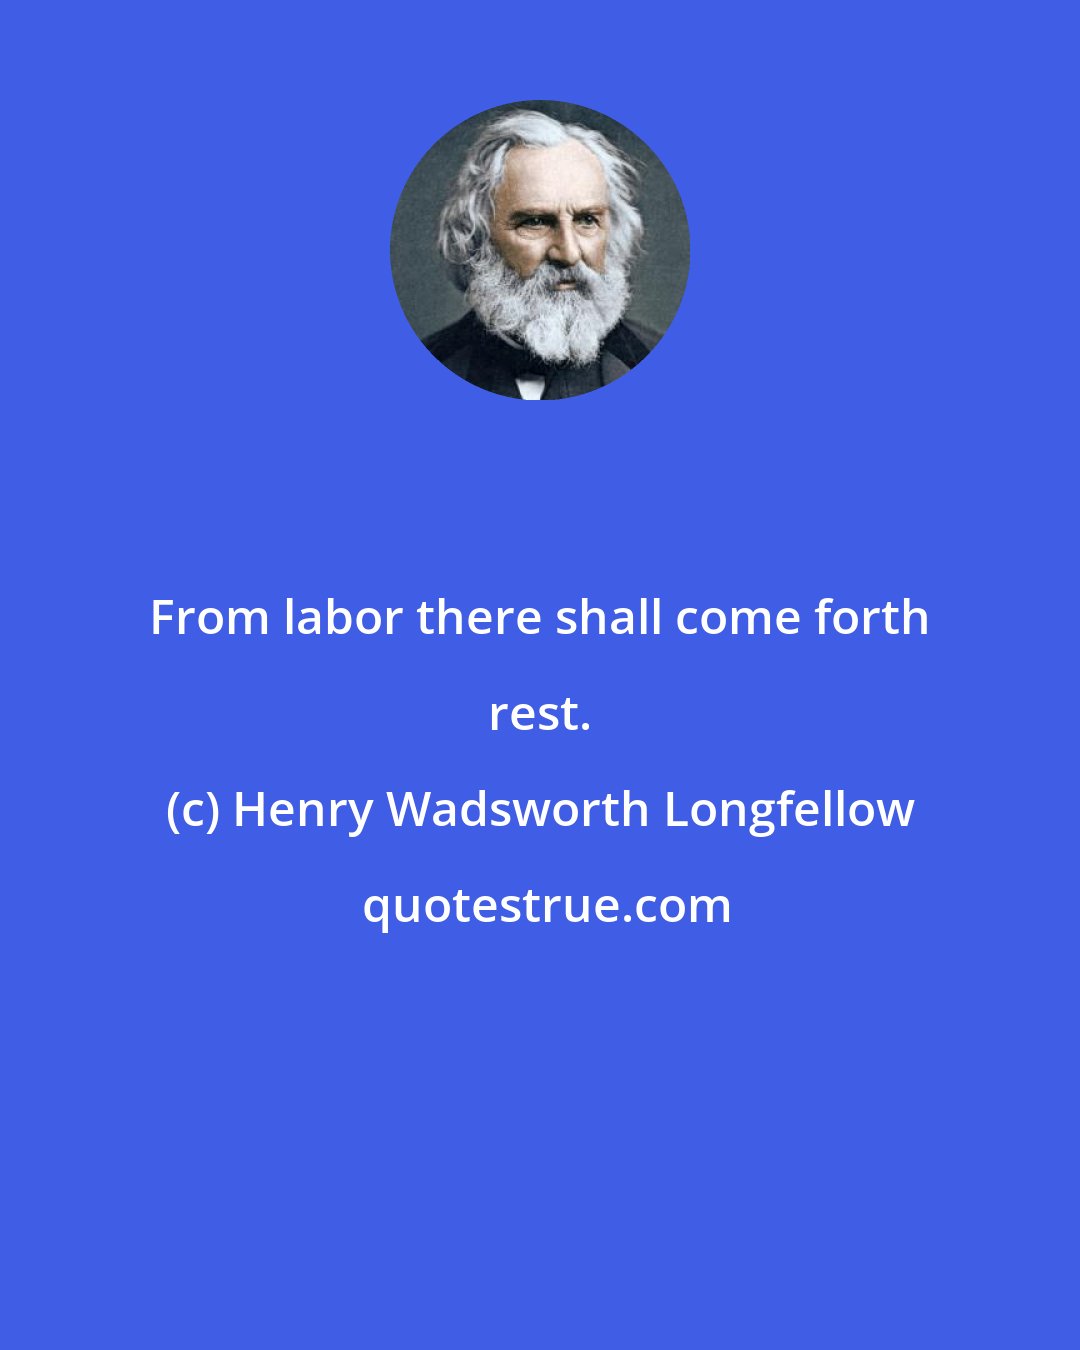 Henry Wadsworth Longfellow: From labor there shall come forth rest.